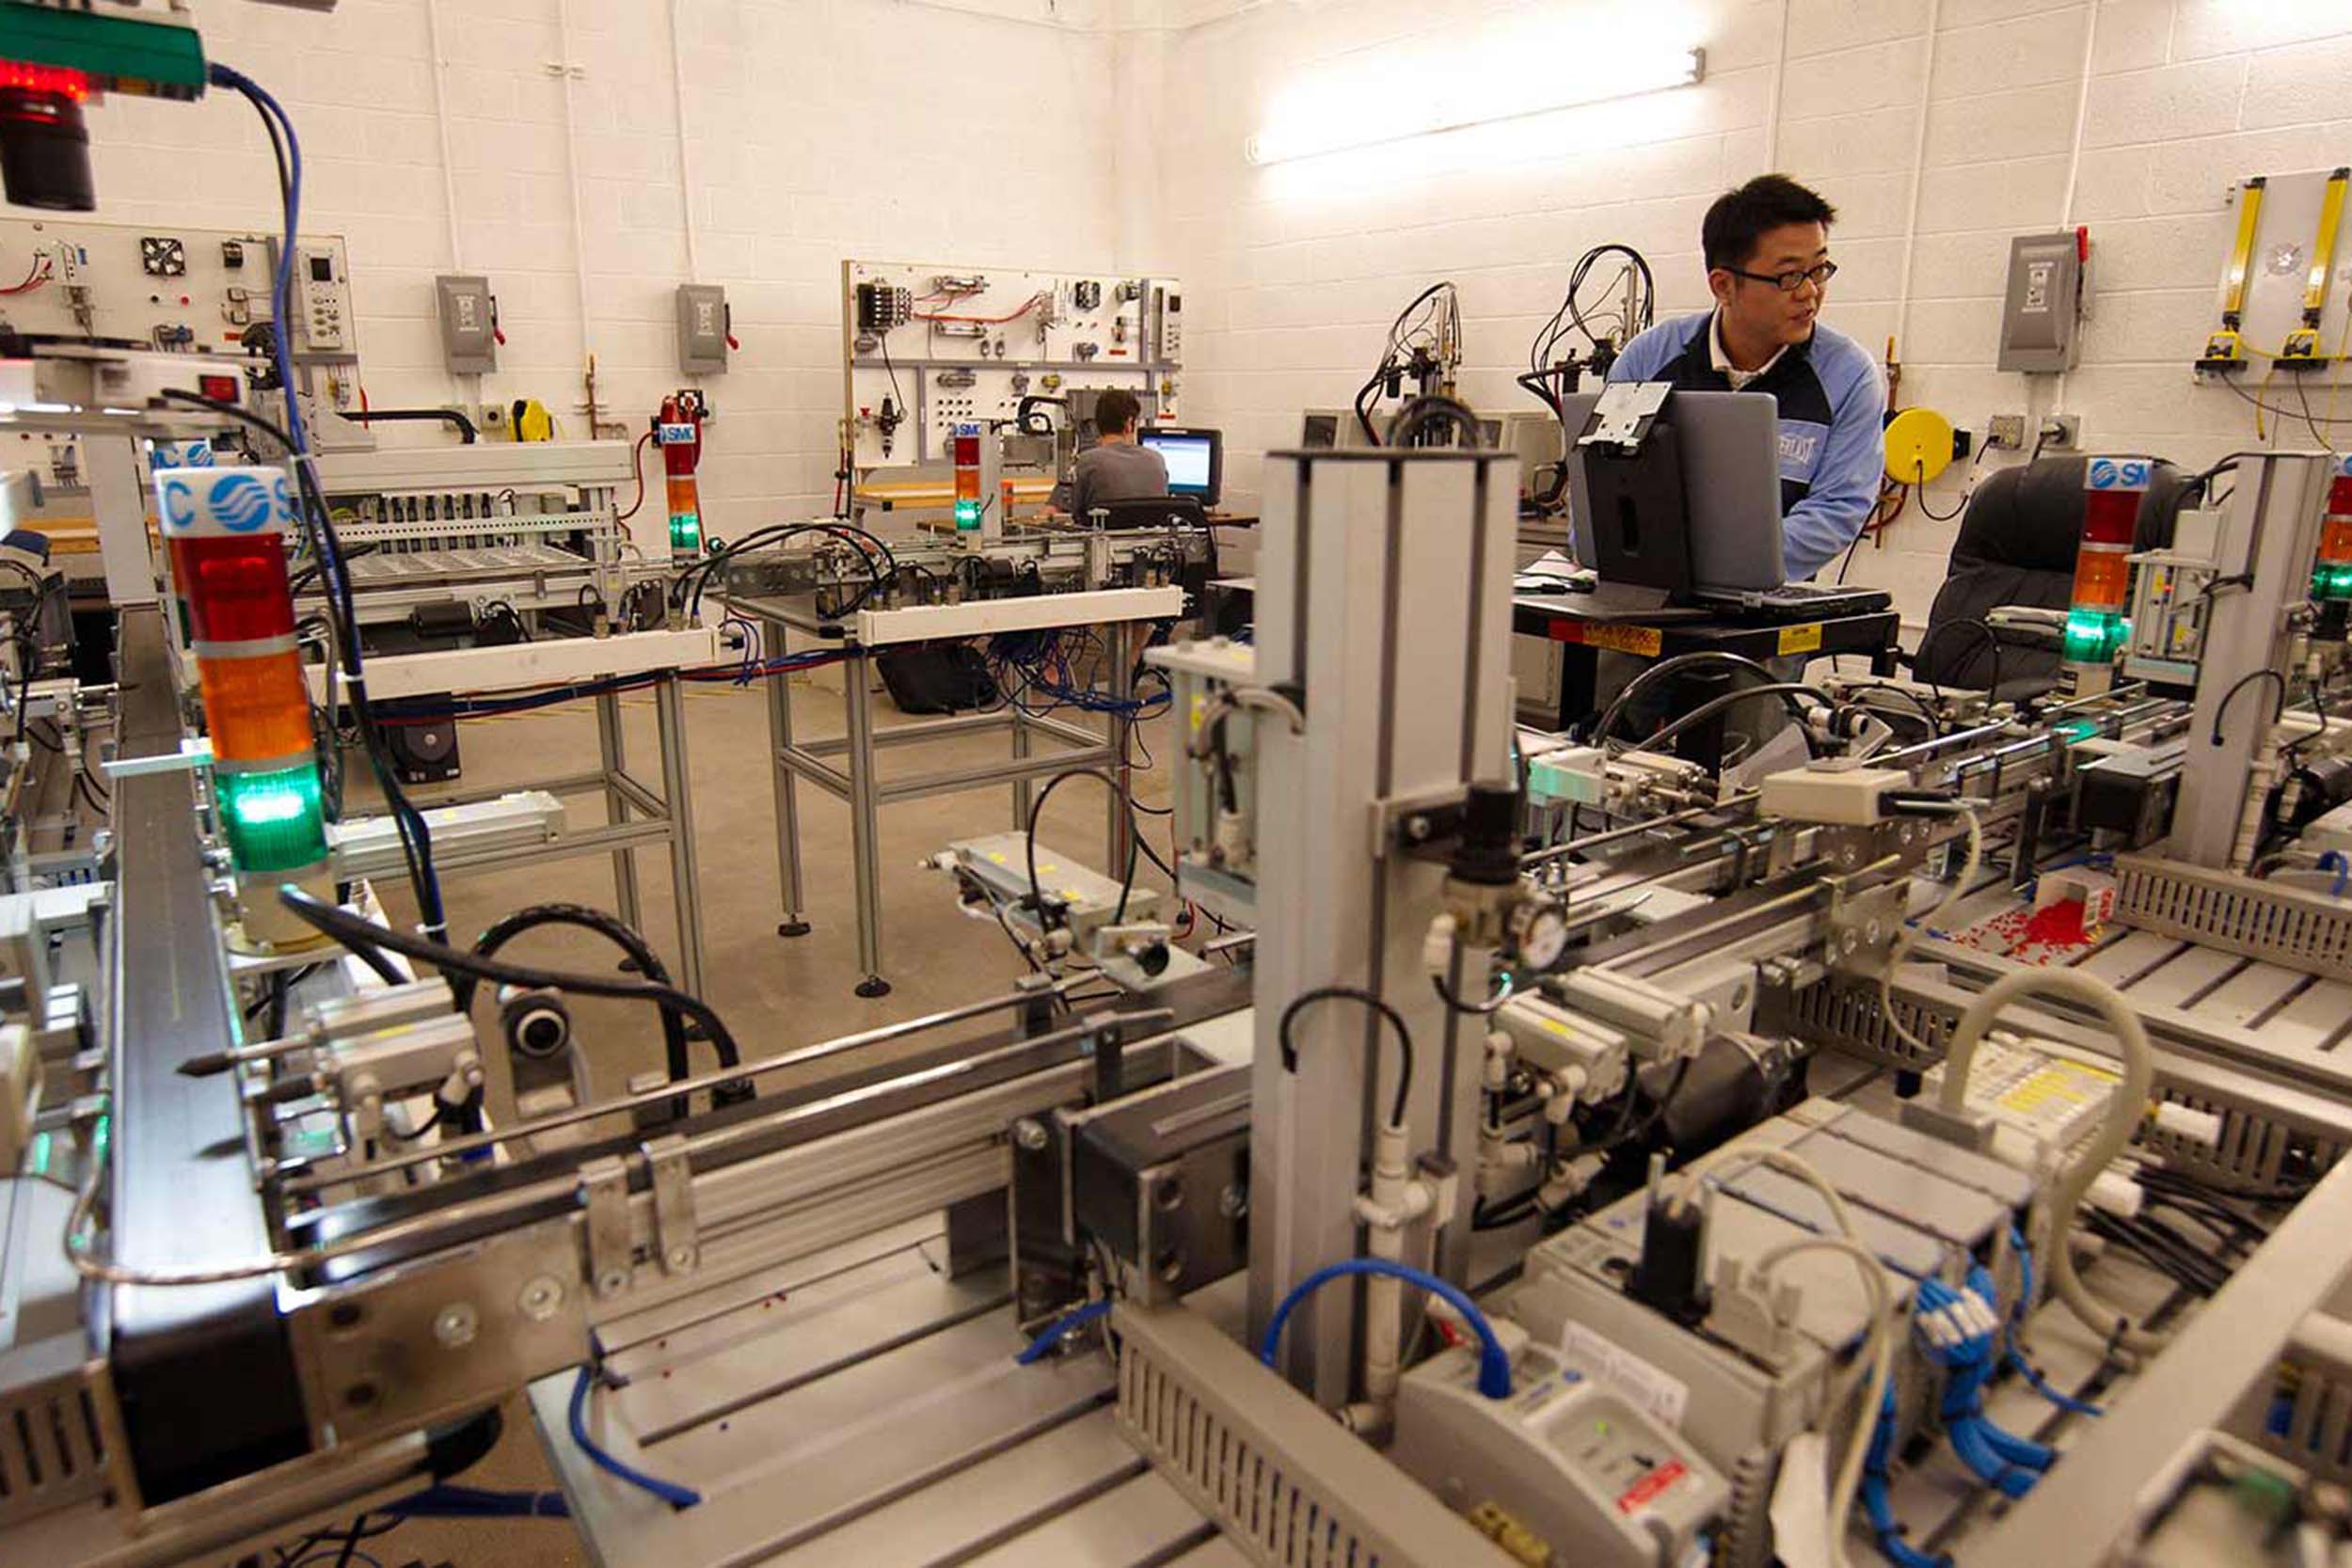 A student works in a systems engineering lab surrounded by several complex mechanical systems